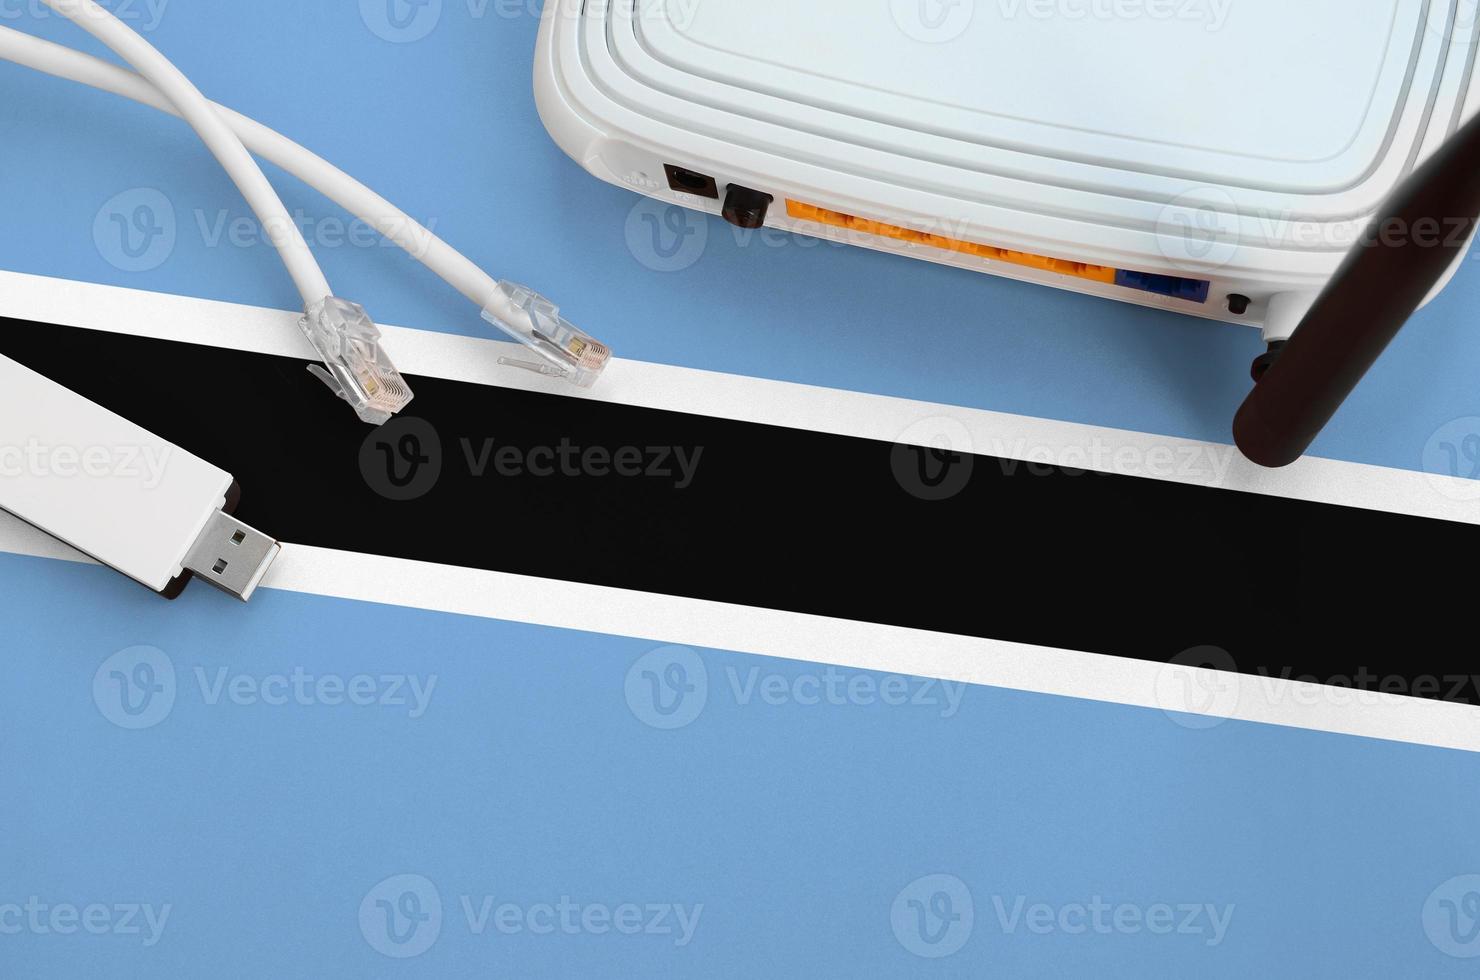 Botswana flag depicted on table with internet rj45 cable, wireless usb wifi adapter and router. Internet connection concept photo